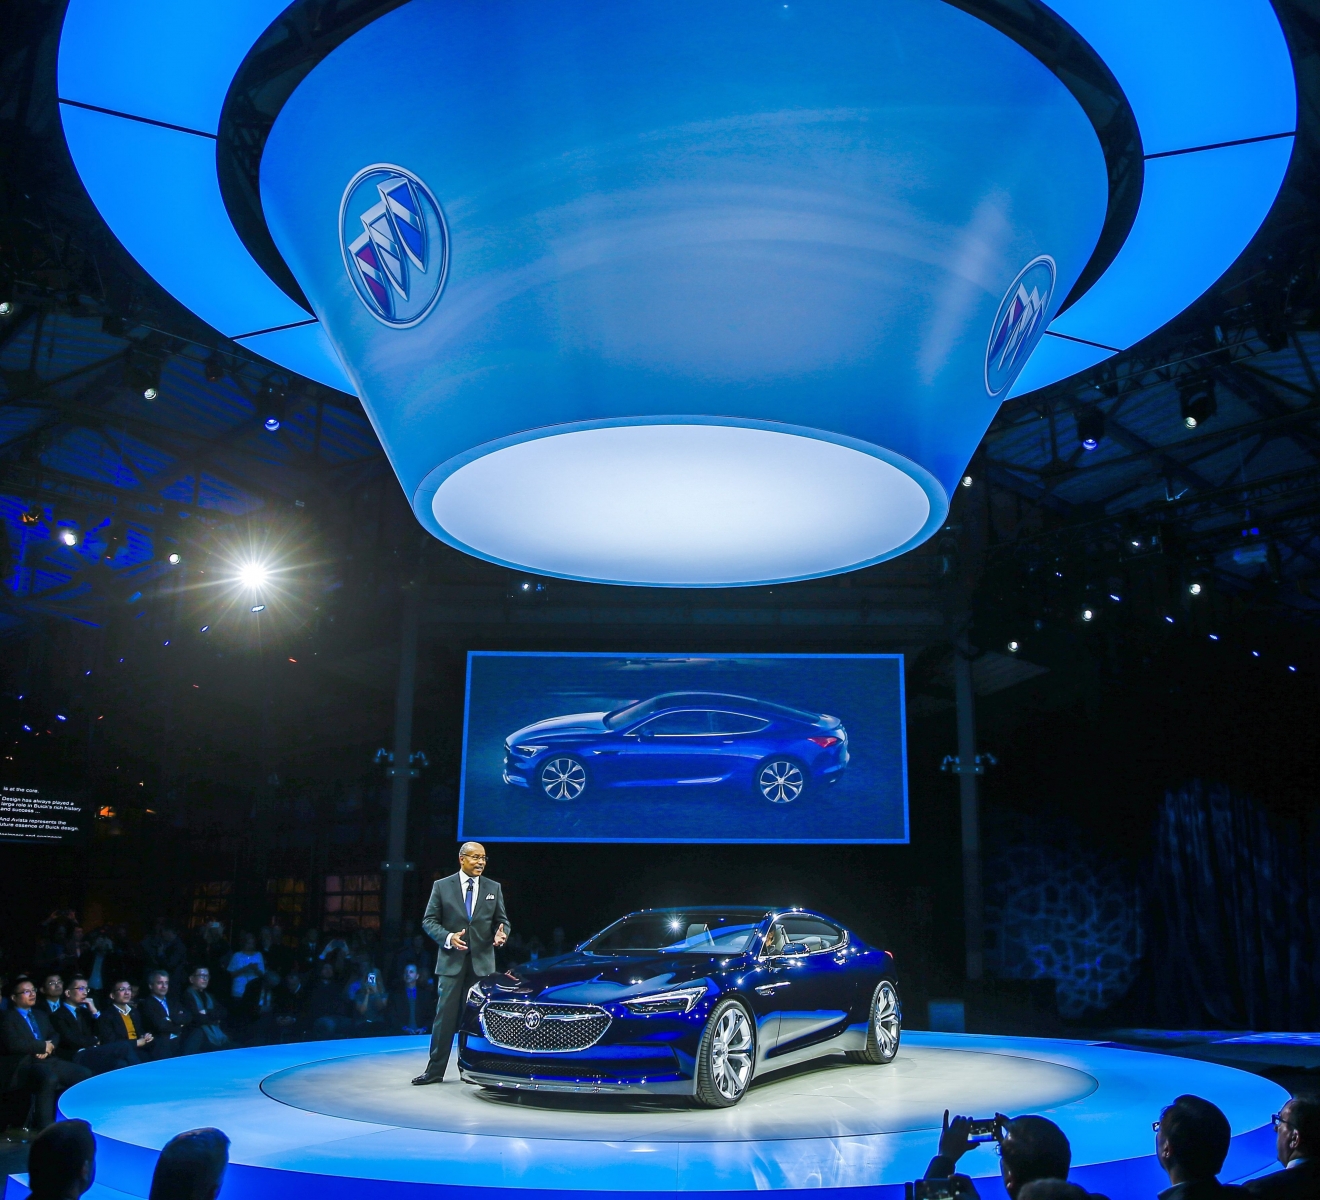 epa05096301 General Motors' Vice President of Global Design, Ed Welburn describes the attributes of the Buick Avista concept automobile during its introduction at a pre-North American International Auto Show event at Shed 3 in Detroit, Michigan, USA, 10 January 2016. The Detroit Auto Show media preview begins on 11 January.  EPA/TANNEN MAURY USA DETROIT AUTO SHOW